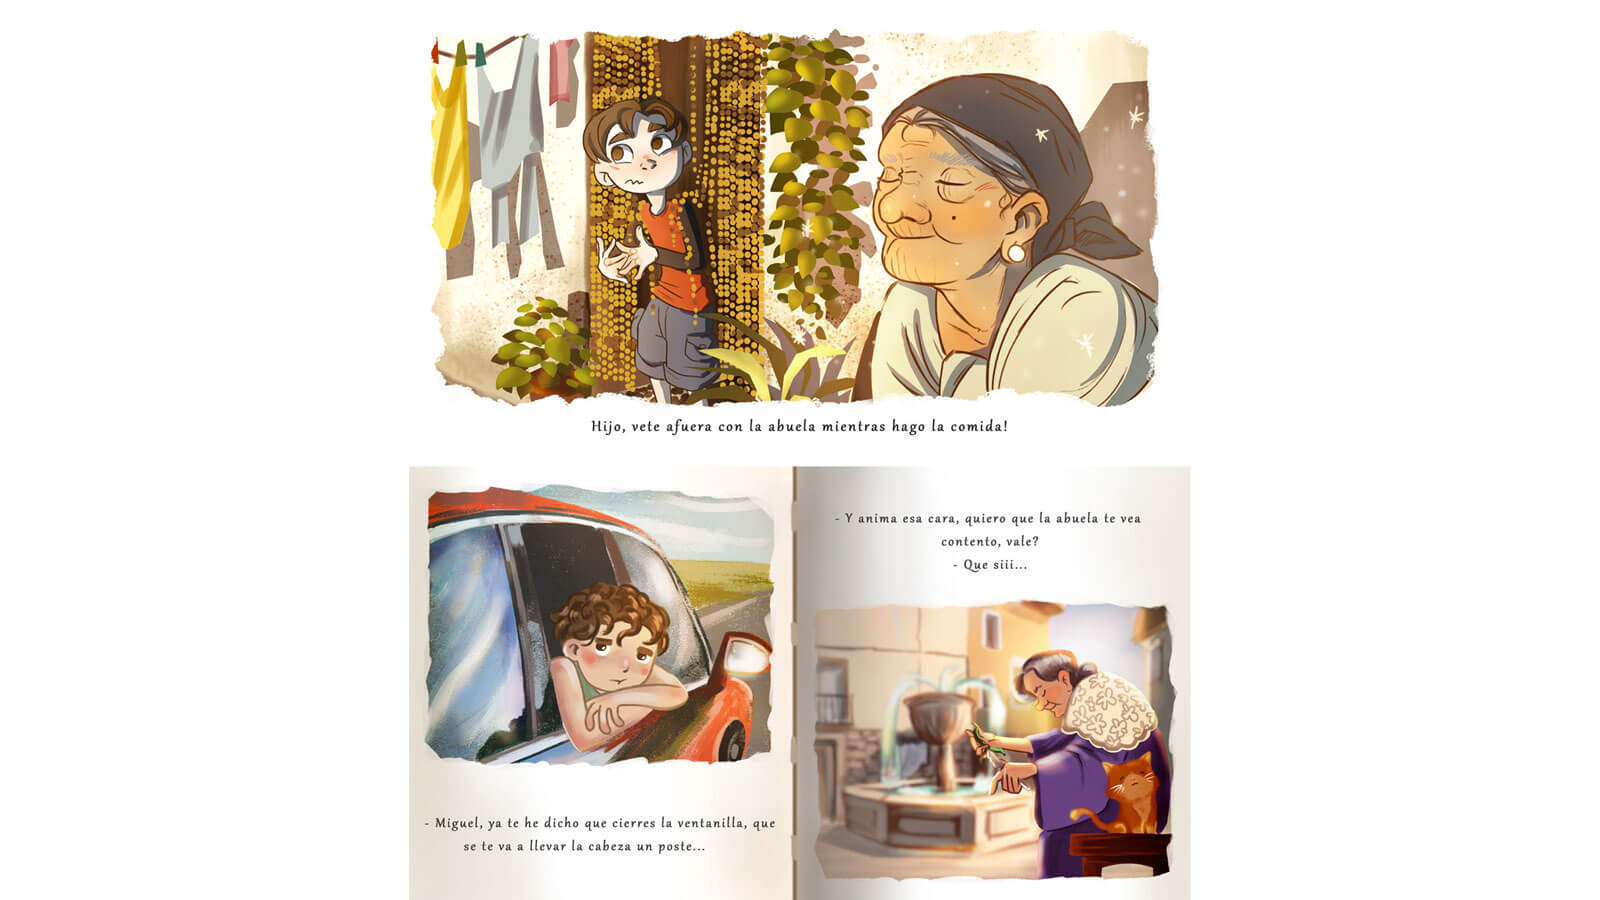 Concept artwork of three scenes including the boy looking out a car window, the boy exiting a house to find his grandma outside, and the grandma cooking next to a cat